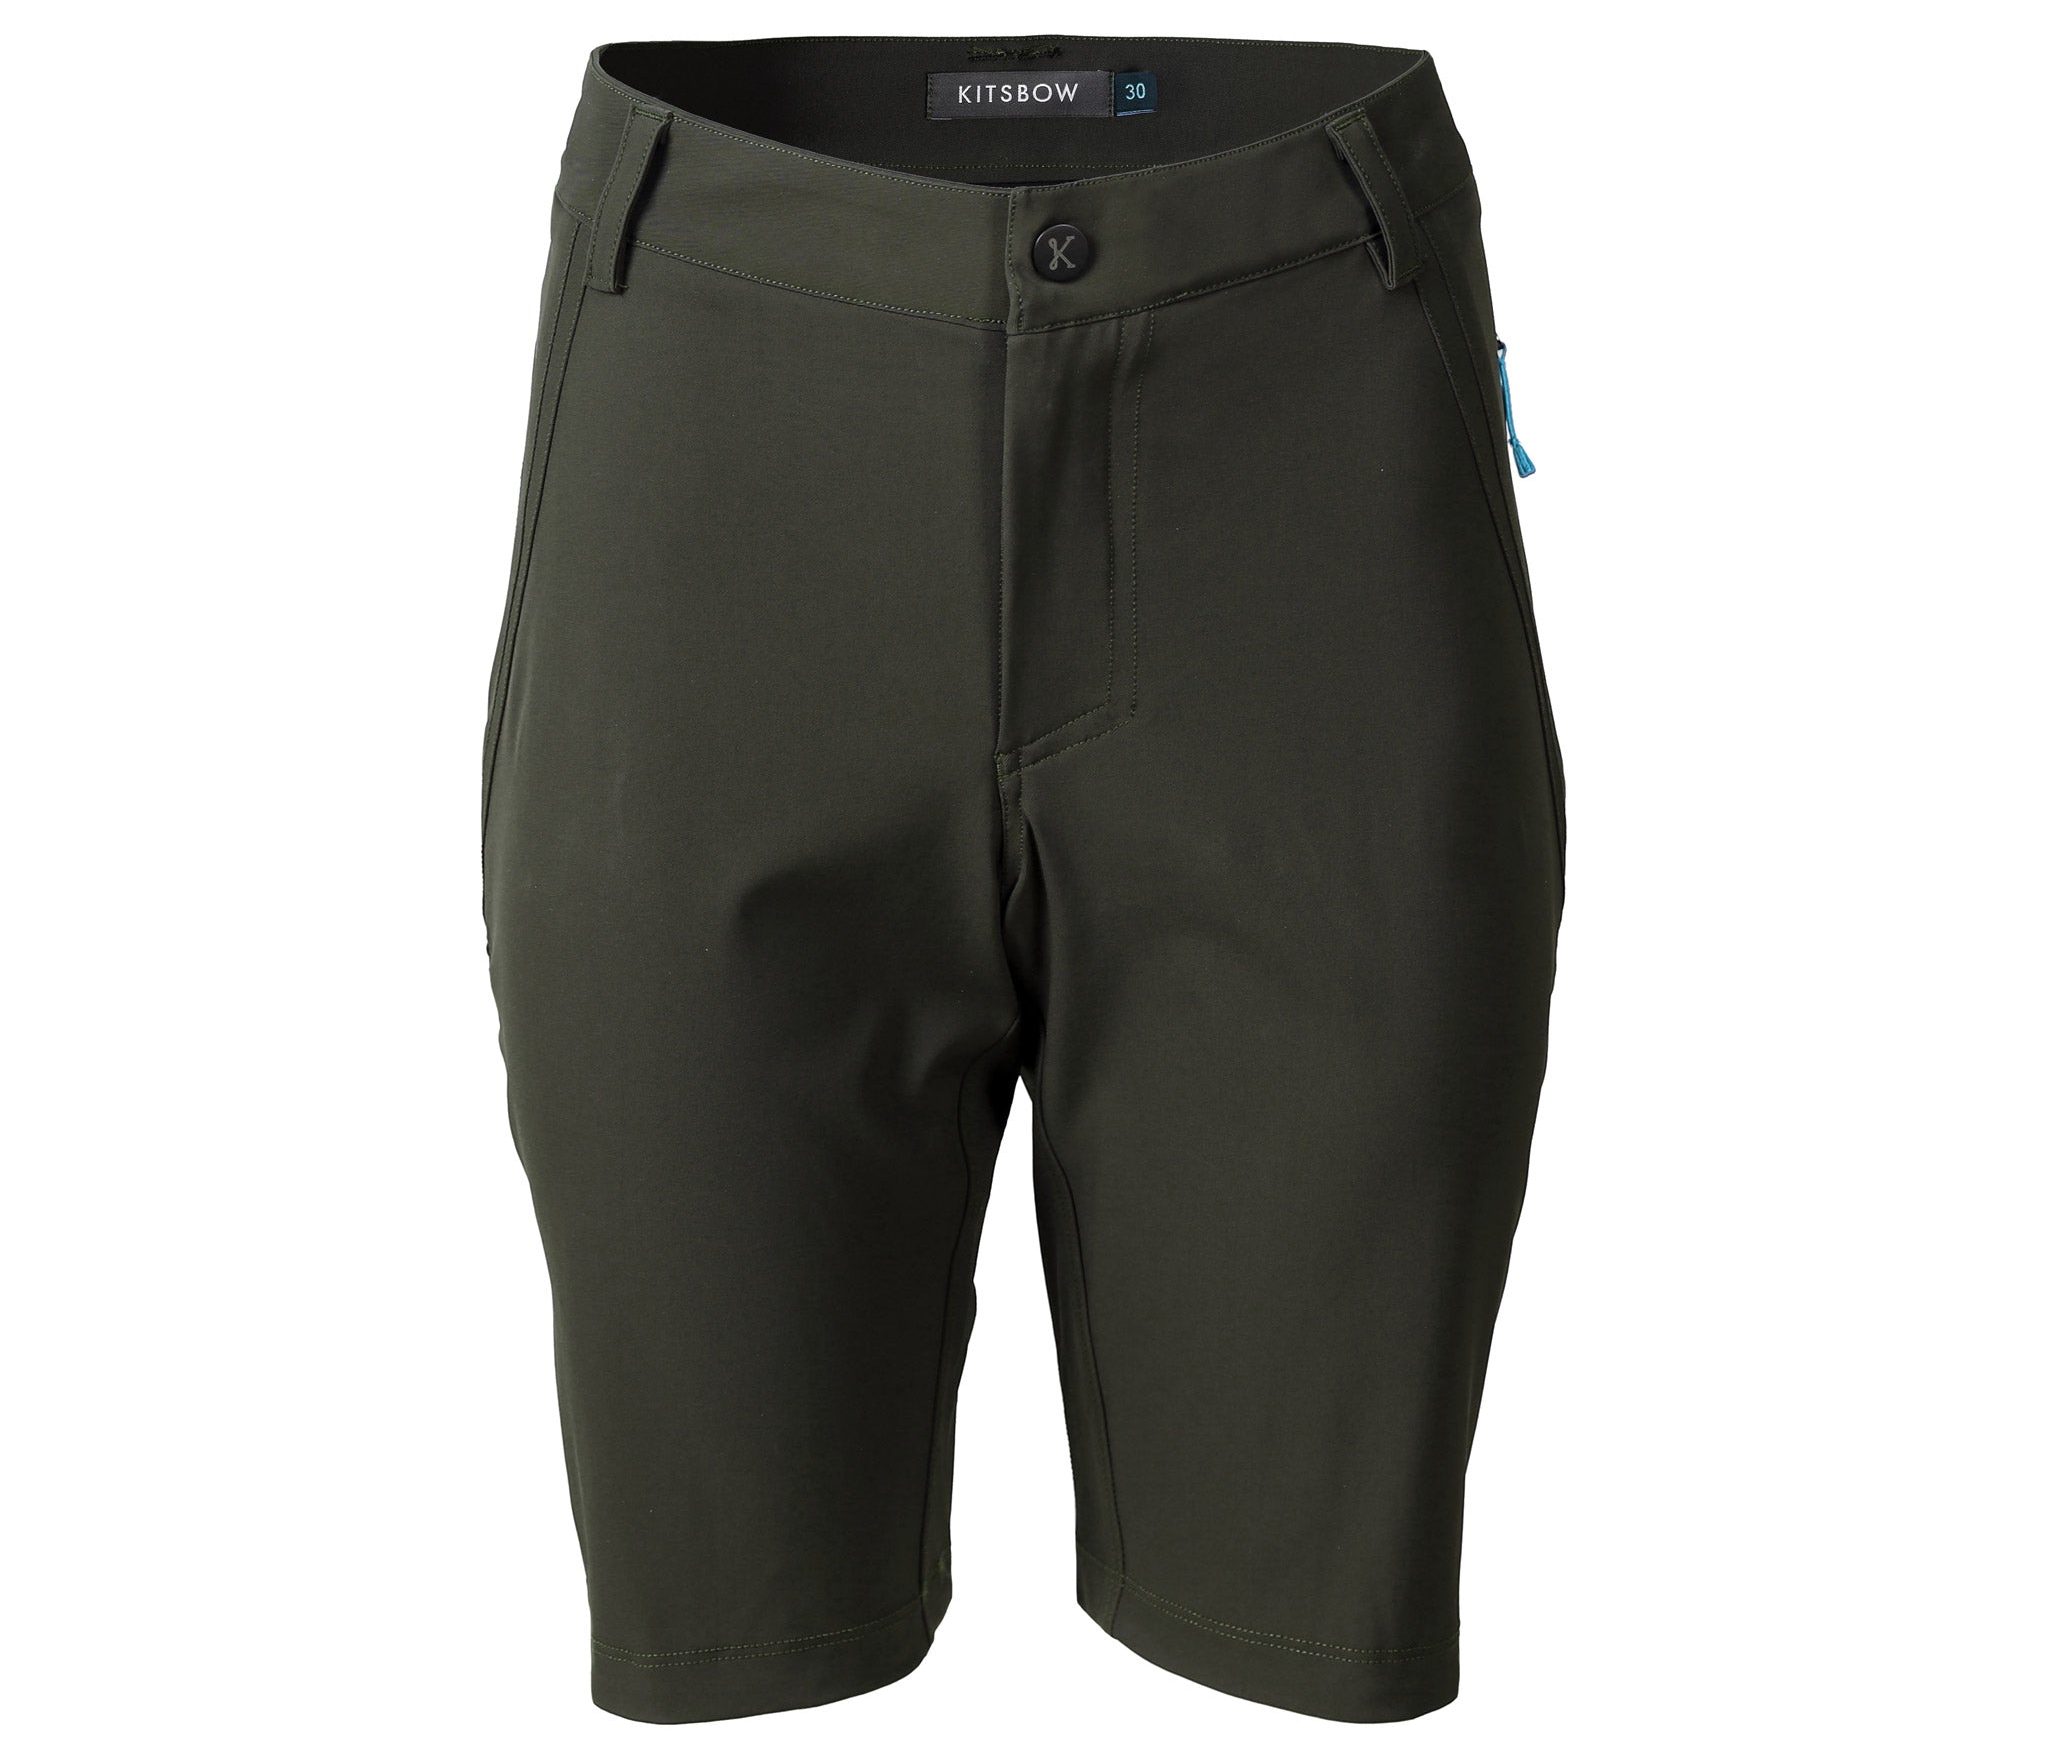 Kitsbow Madrone shorts with an 11-inch inseam.